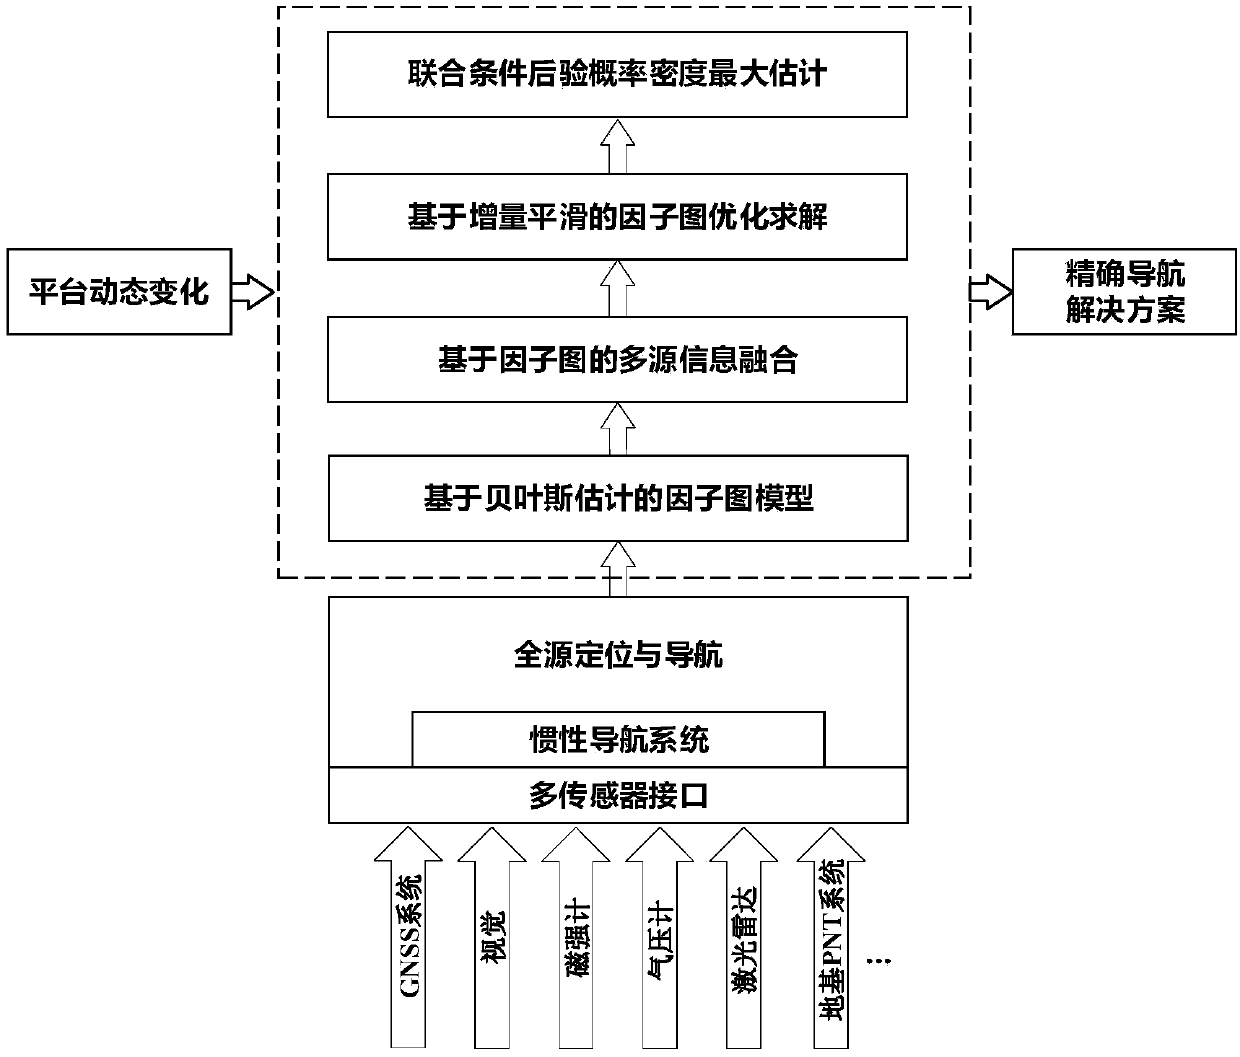 Multi-source information fusion method based on factor graph